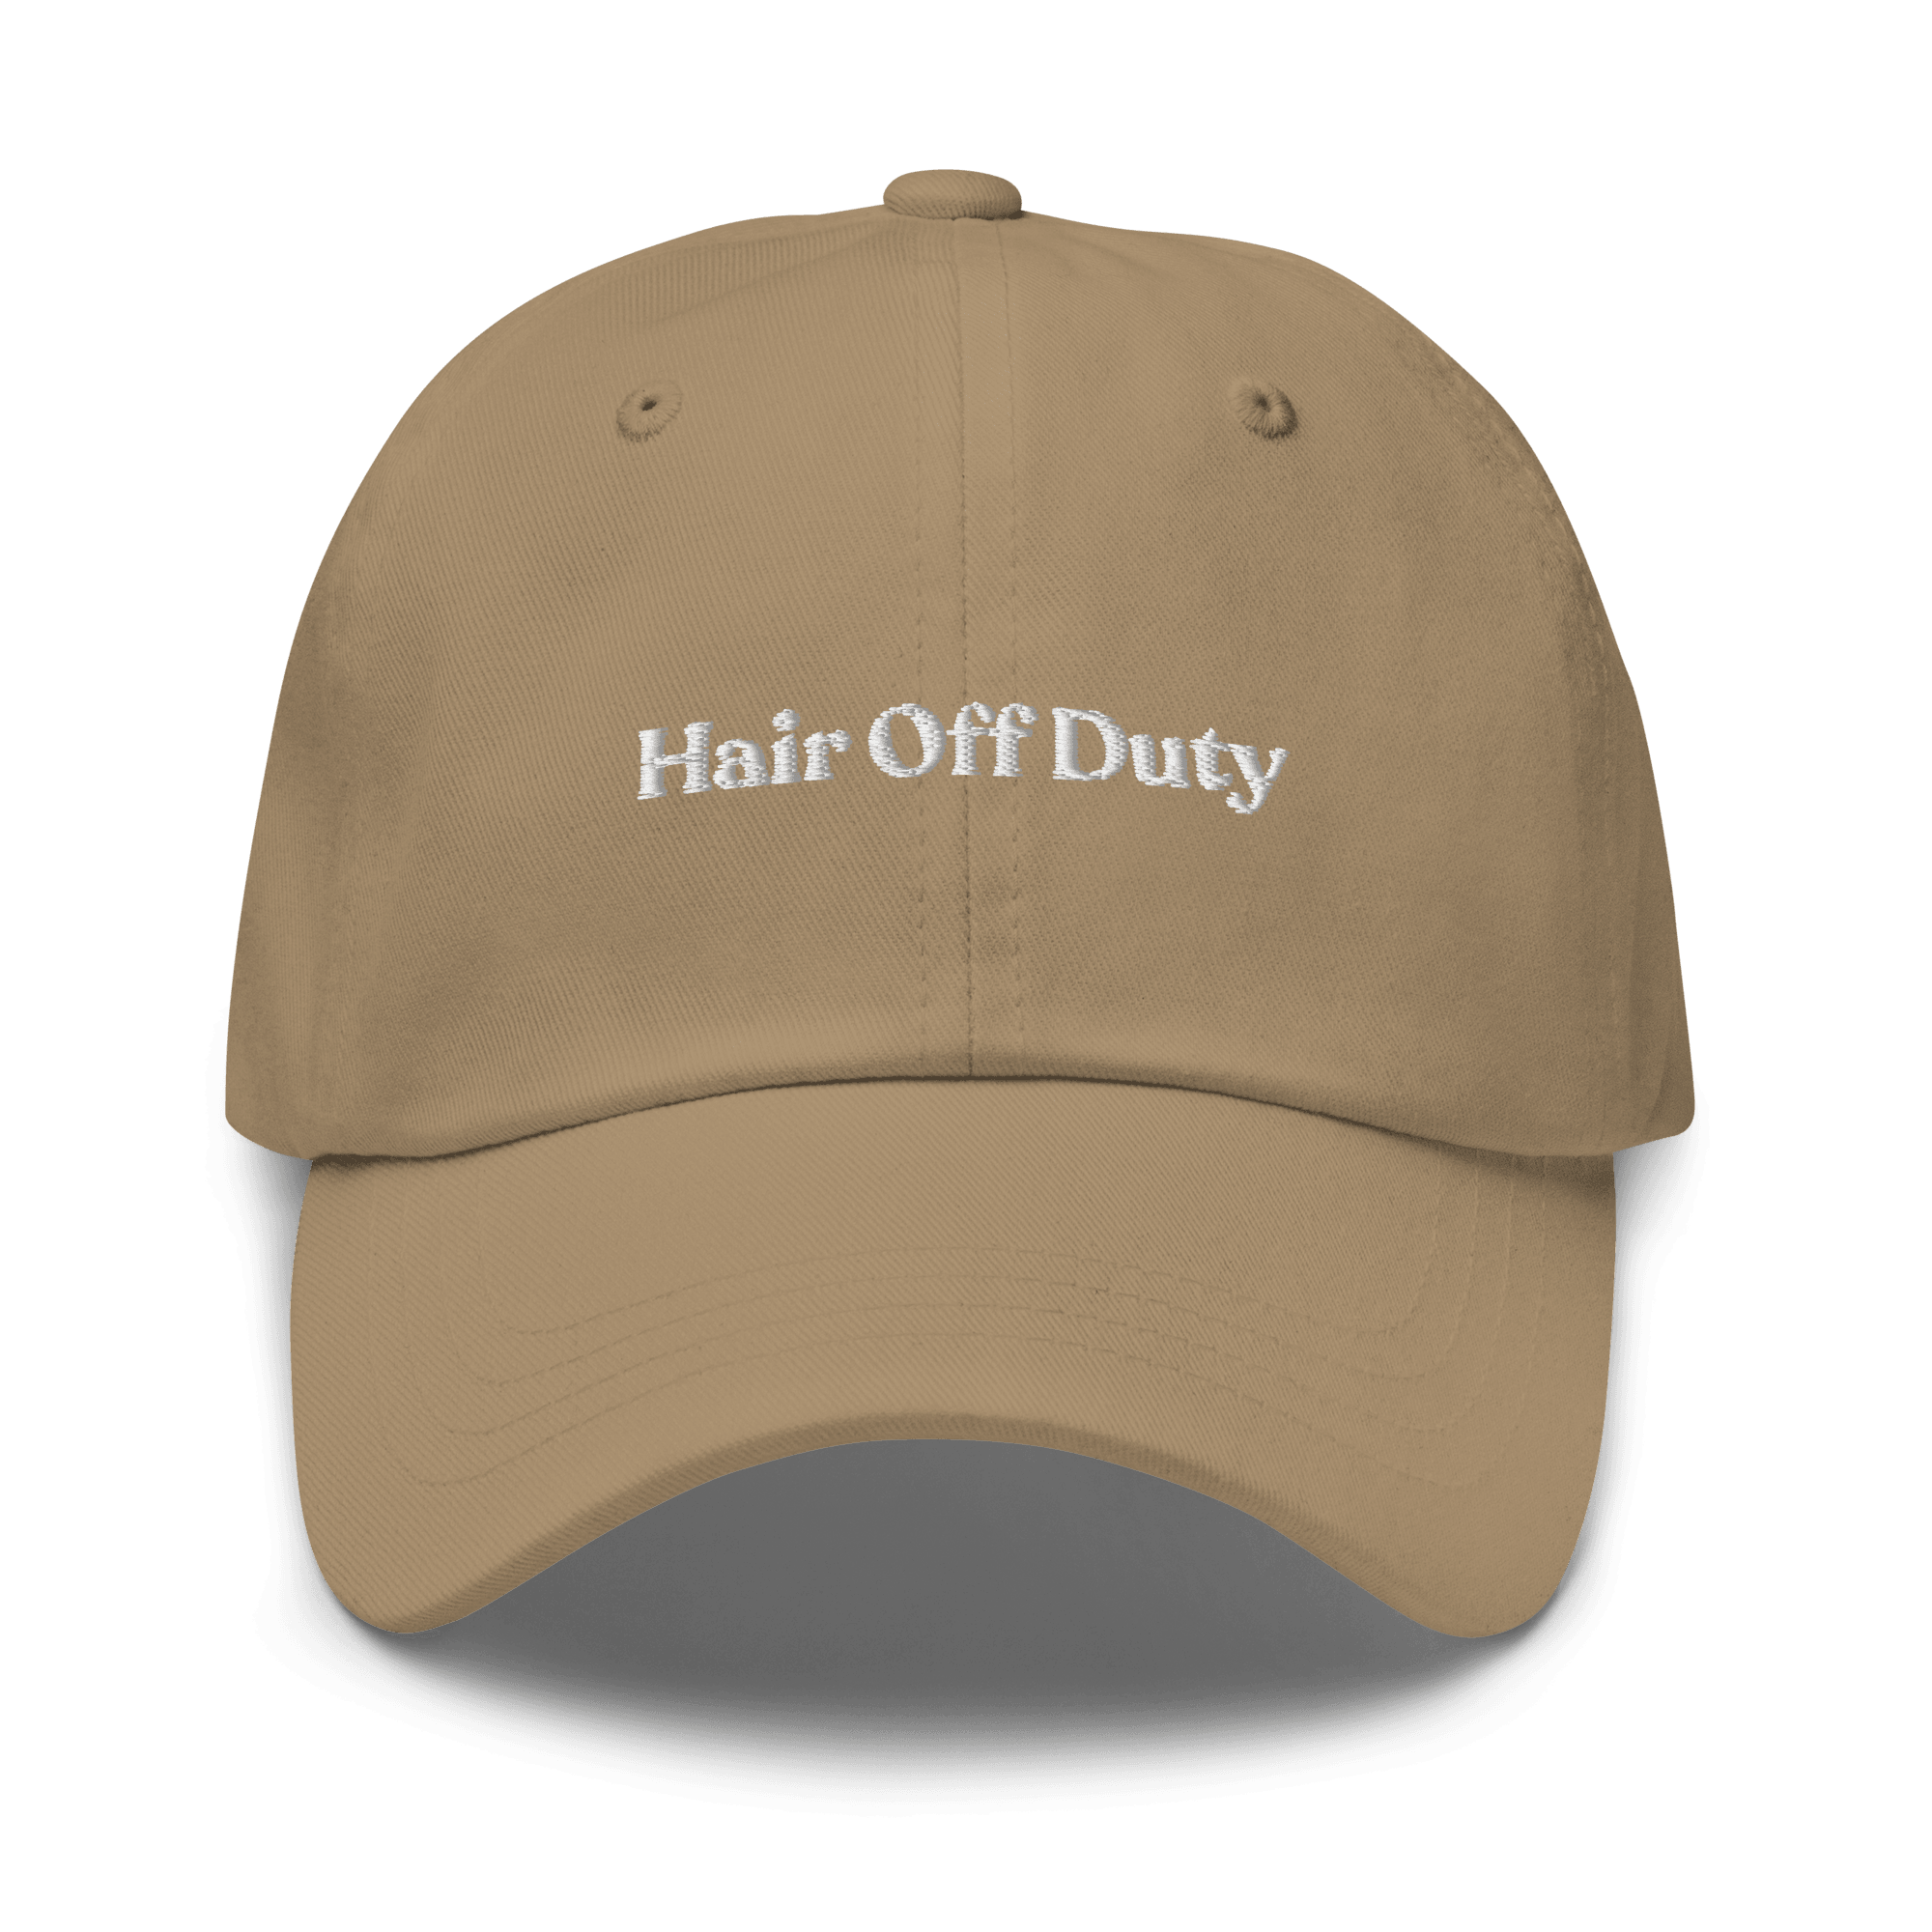 Hair Off Duty Embroidered Dad Hat - Polychrome Goods 🍊